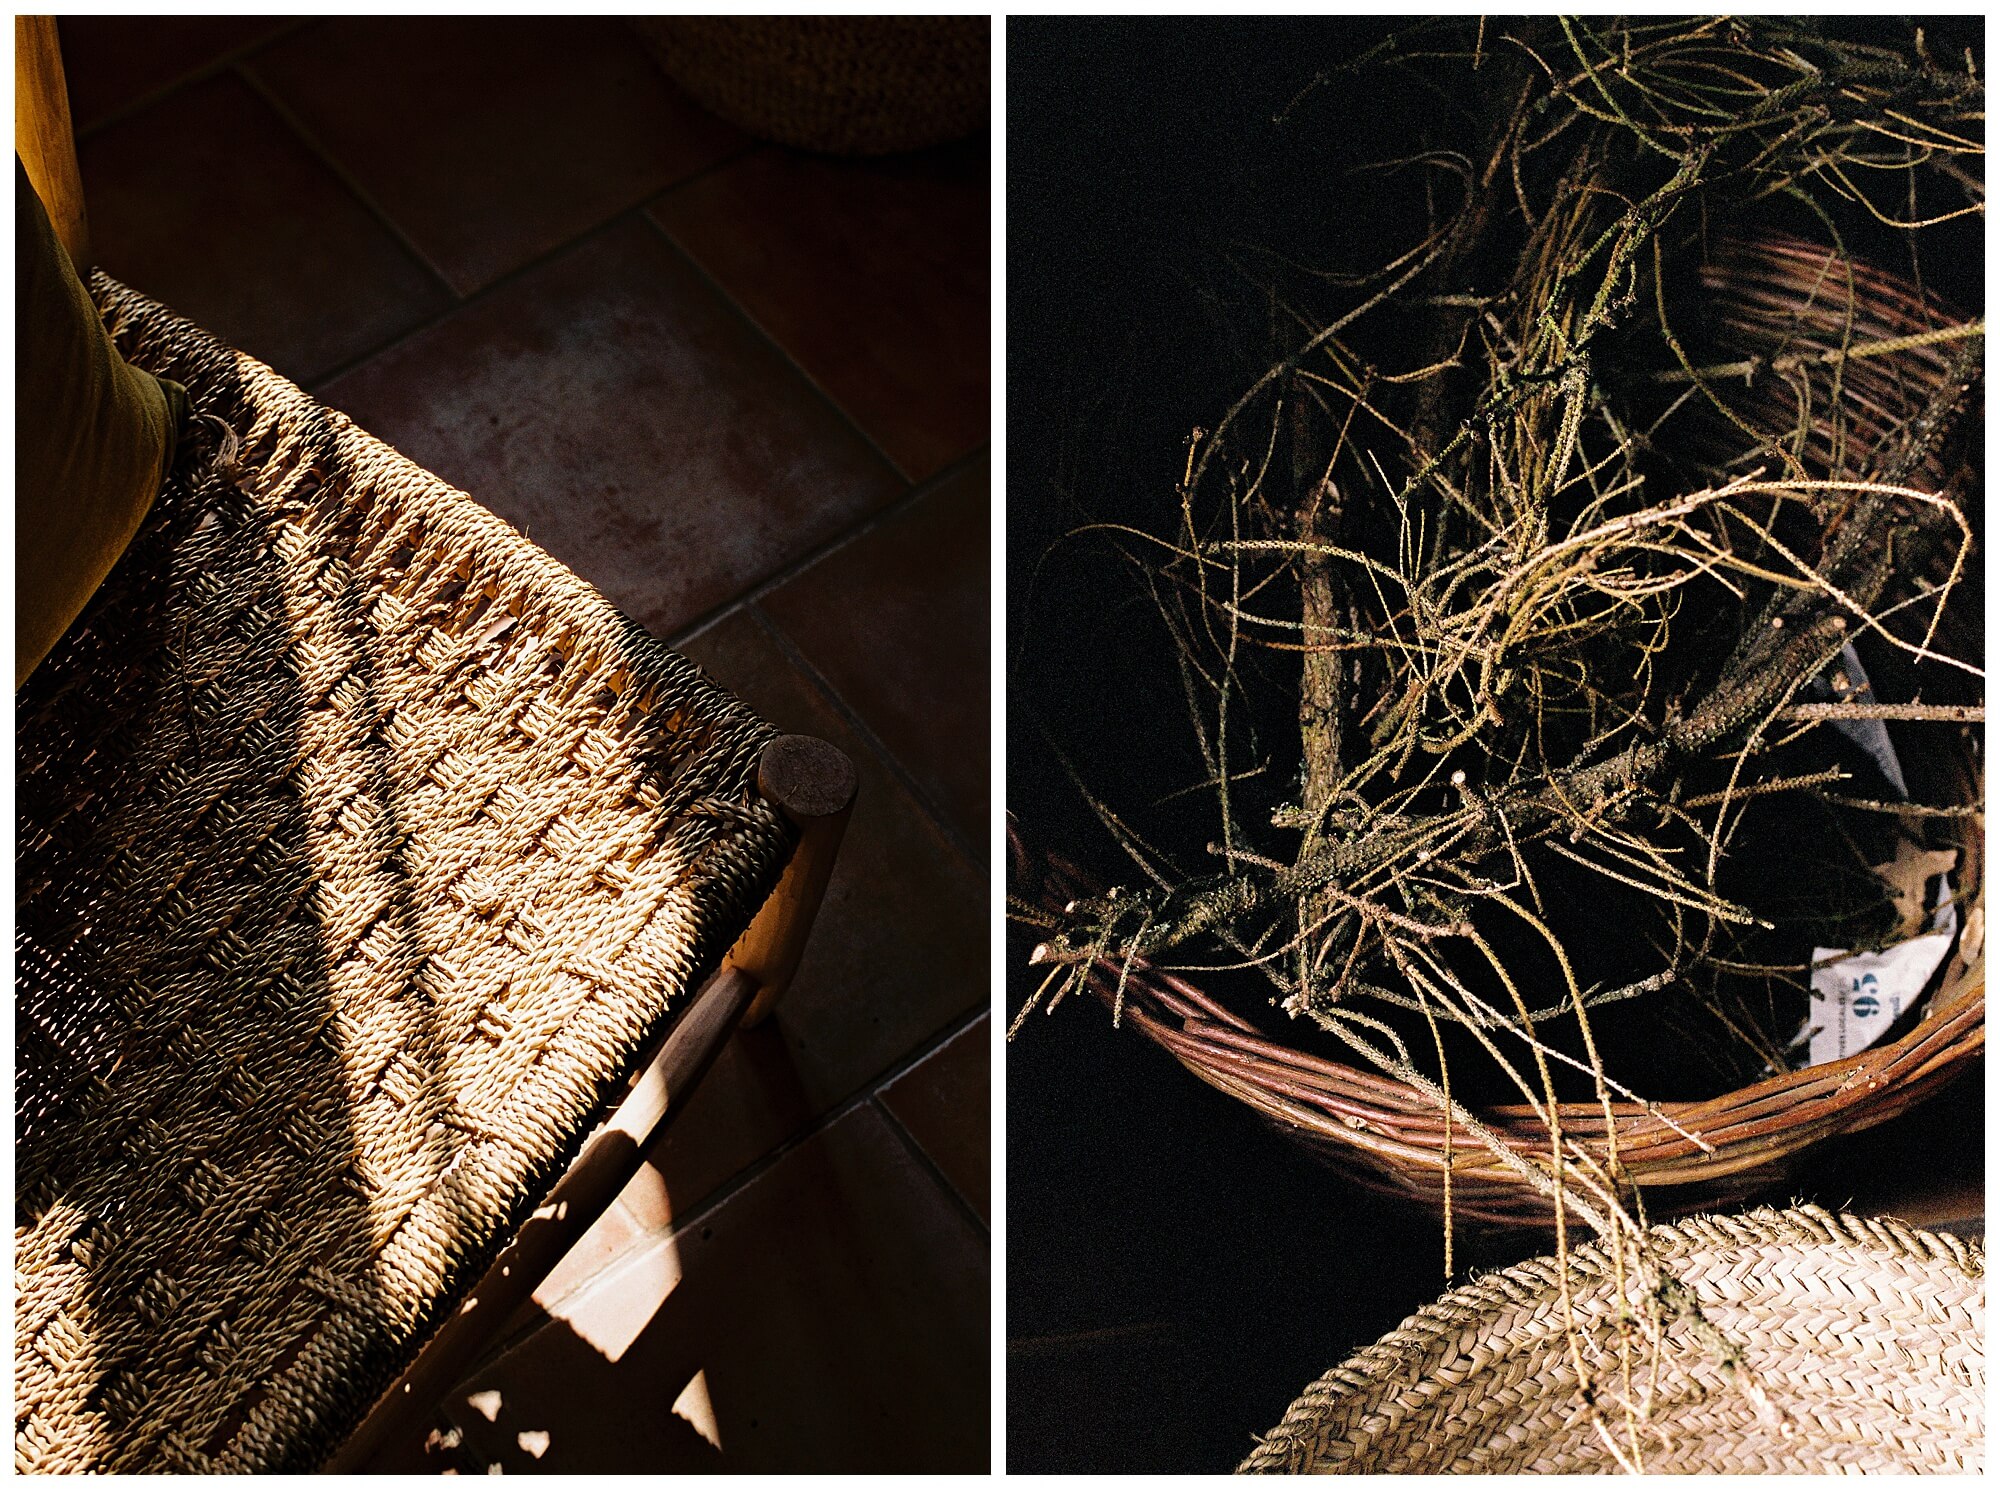 Left: Morning light casts a shadow on a woven wood chair. Right: Fading sunlight falls on a mess of branches in a wooden basket.